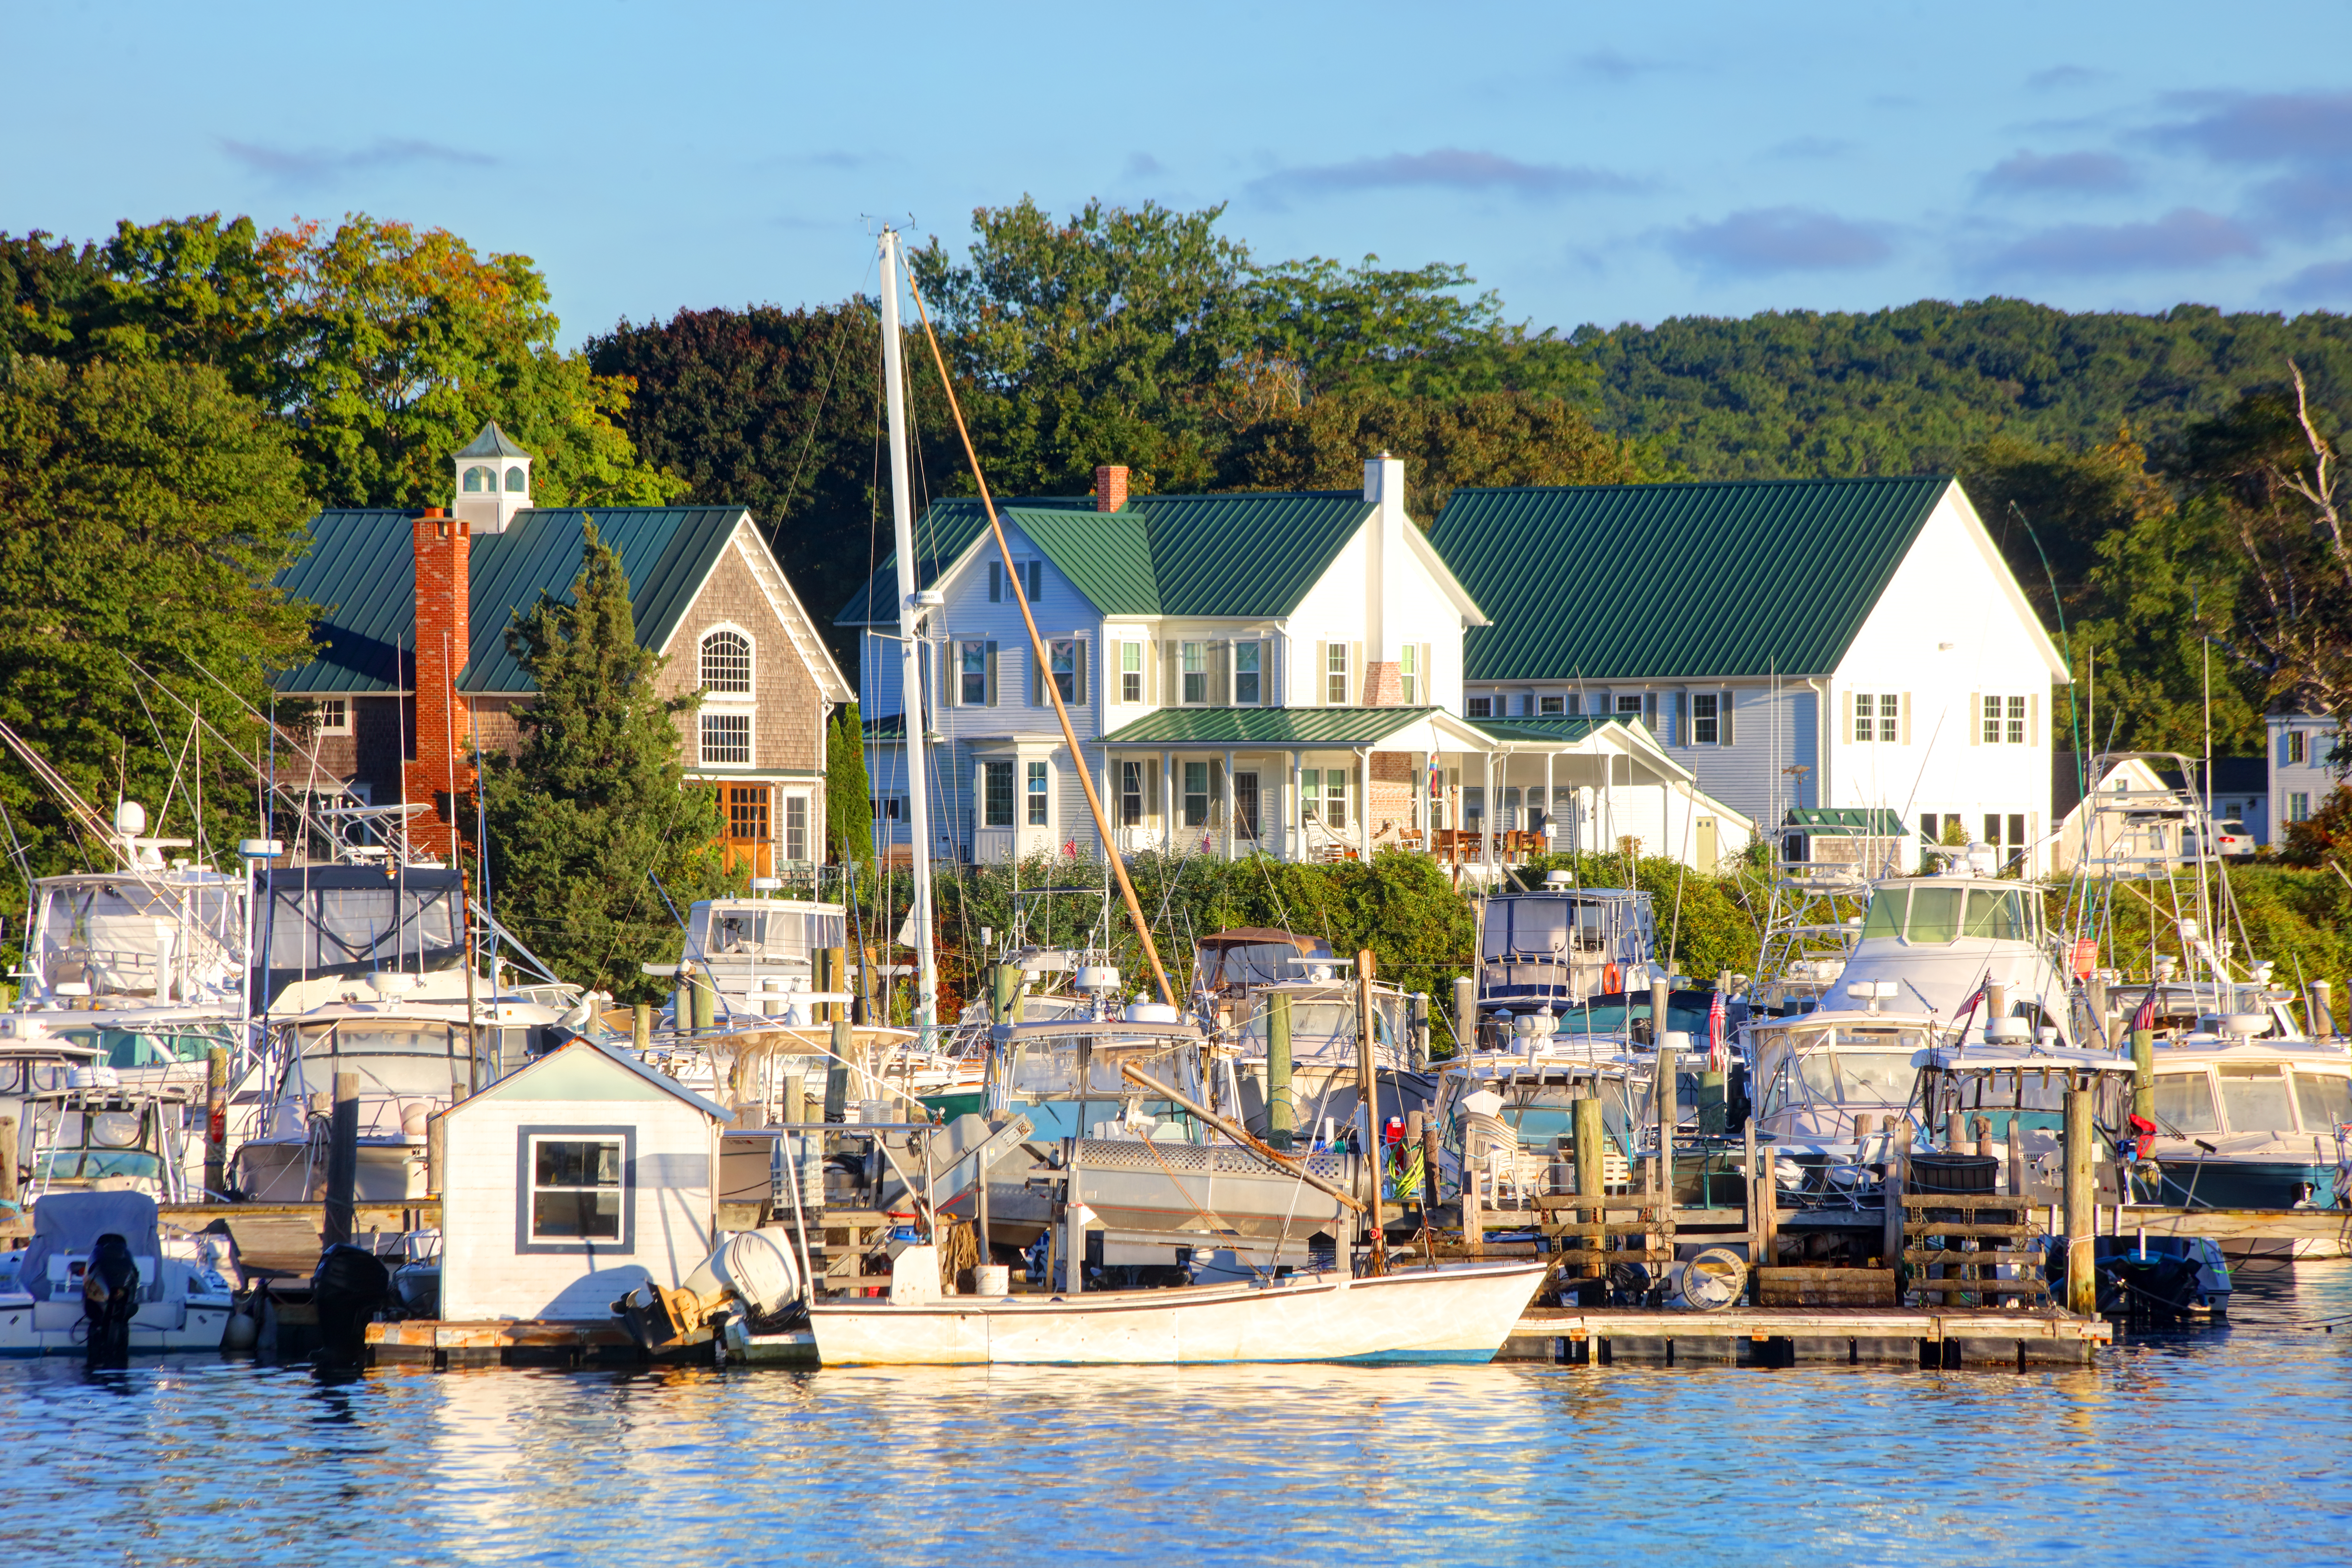 Houses on a New England shoreline, photographed on a sunny day.